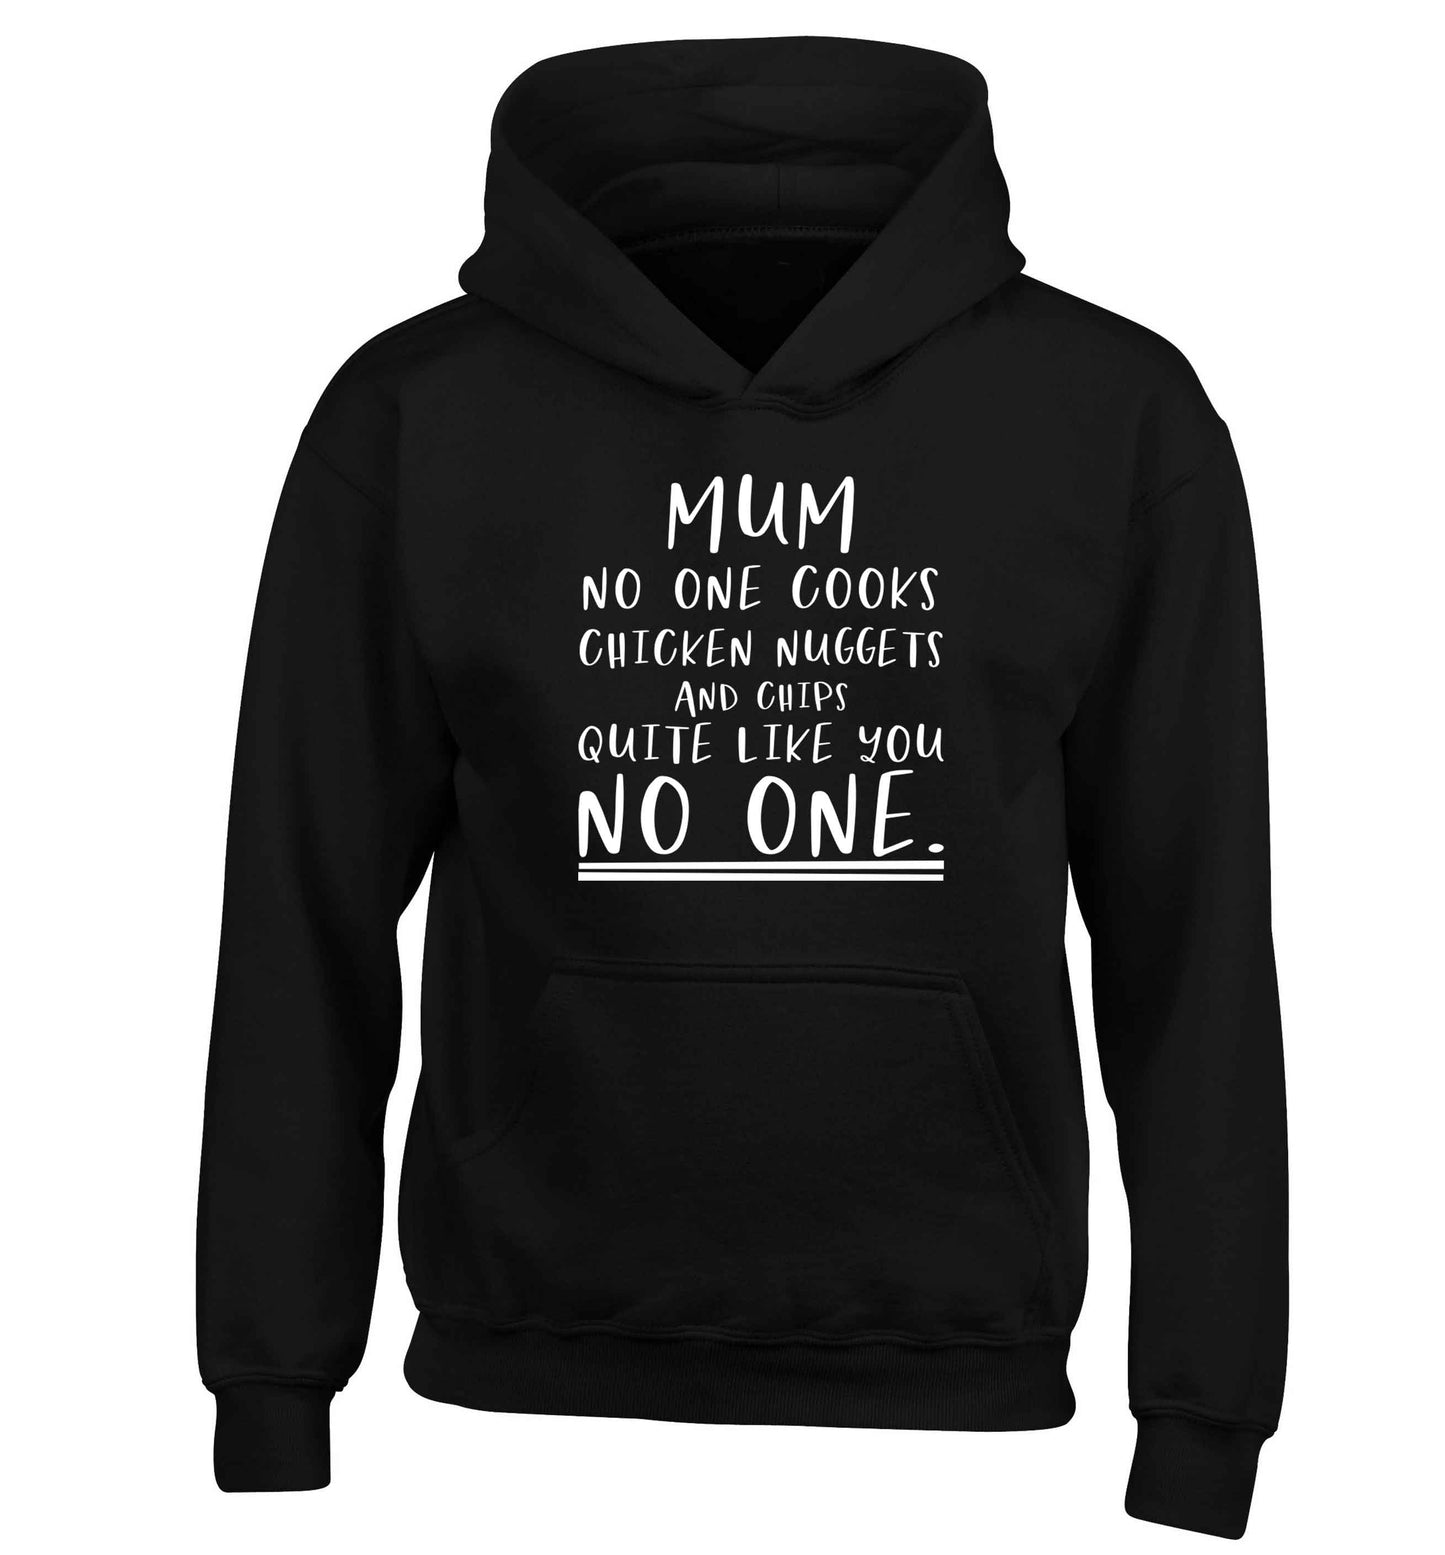 Super funny sassy gift for mother's day or birthday!  Mum no one cooks chicken nuggets and chips like you no one children's black hoodie 12-13 Years